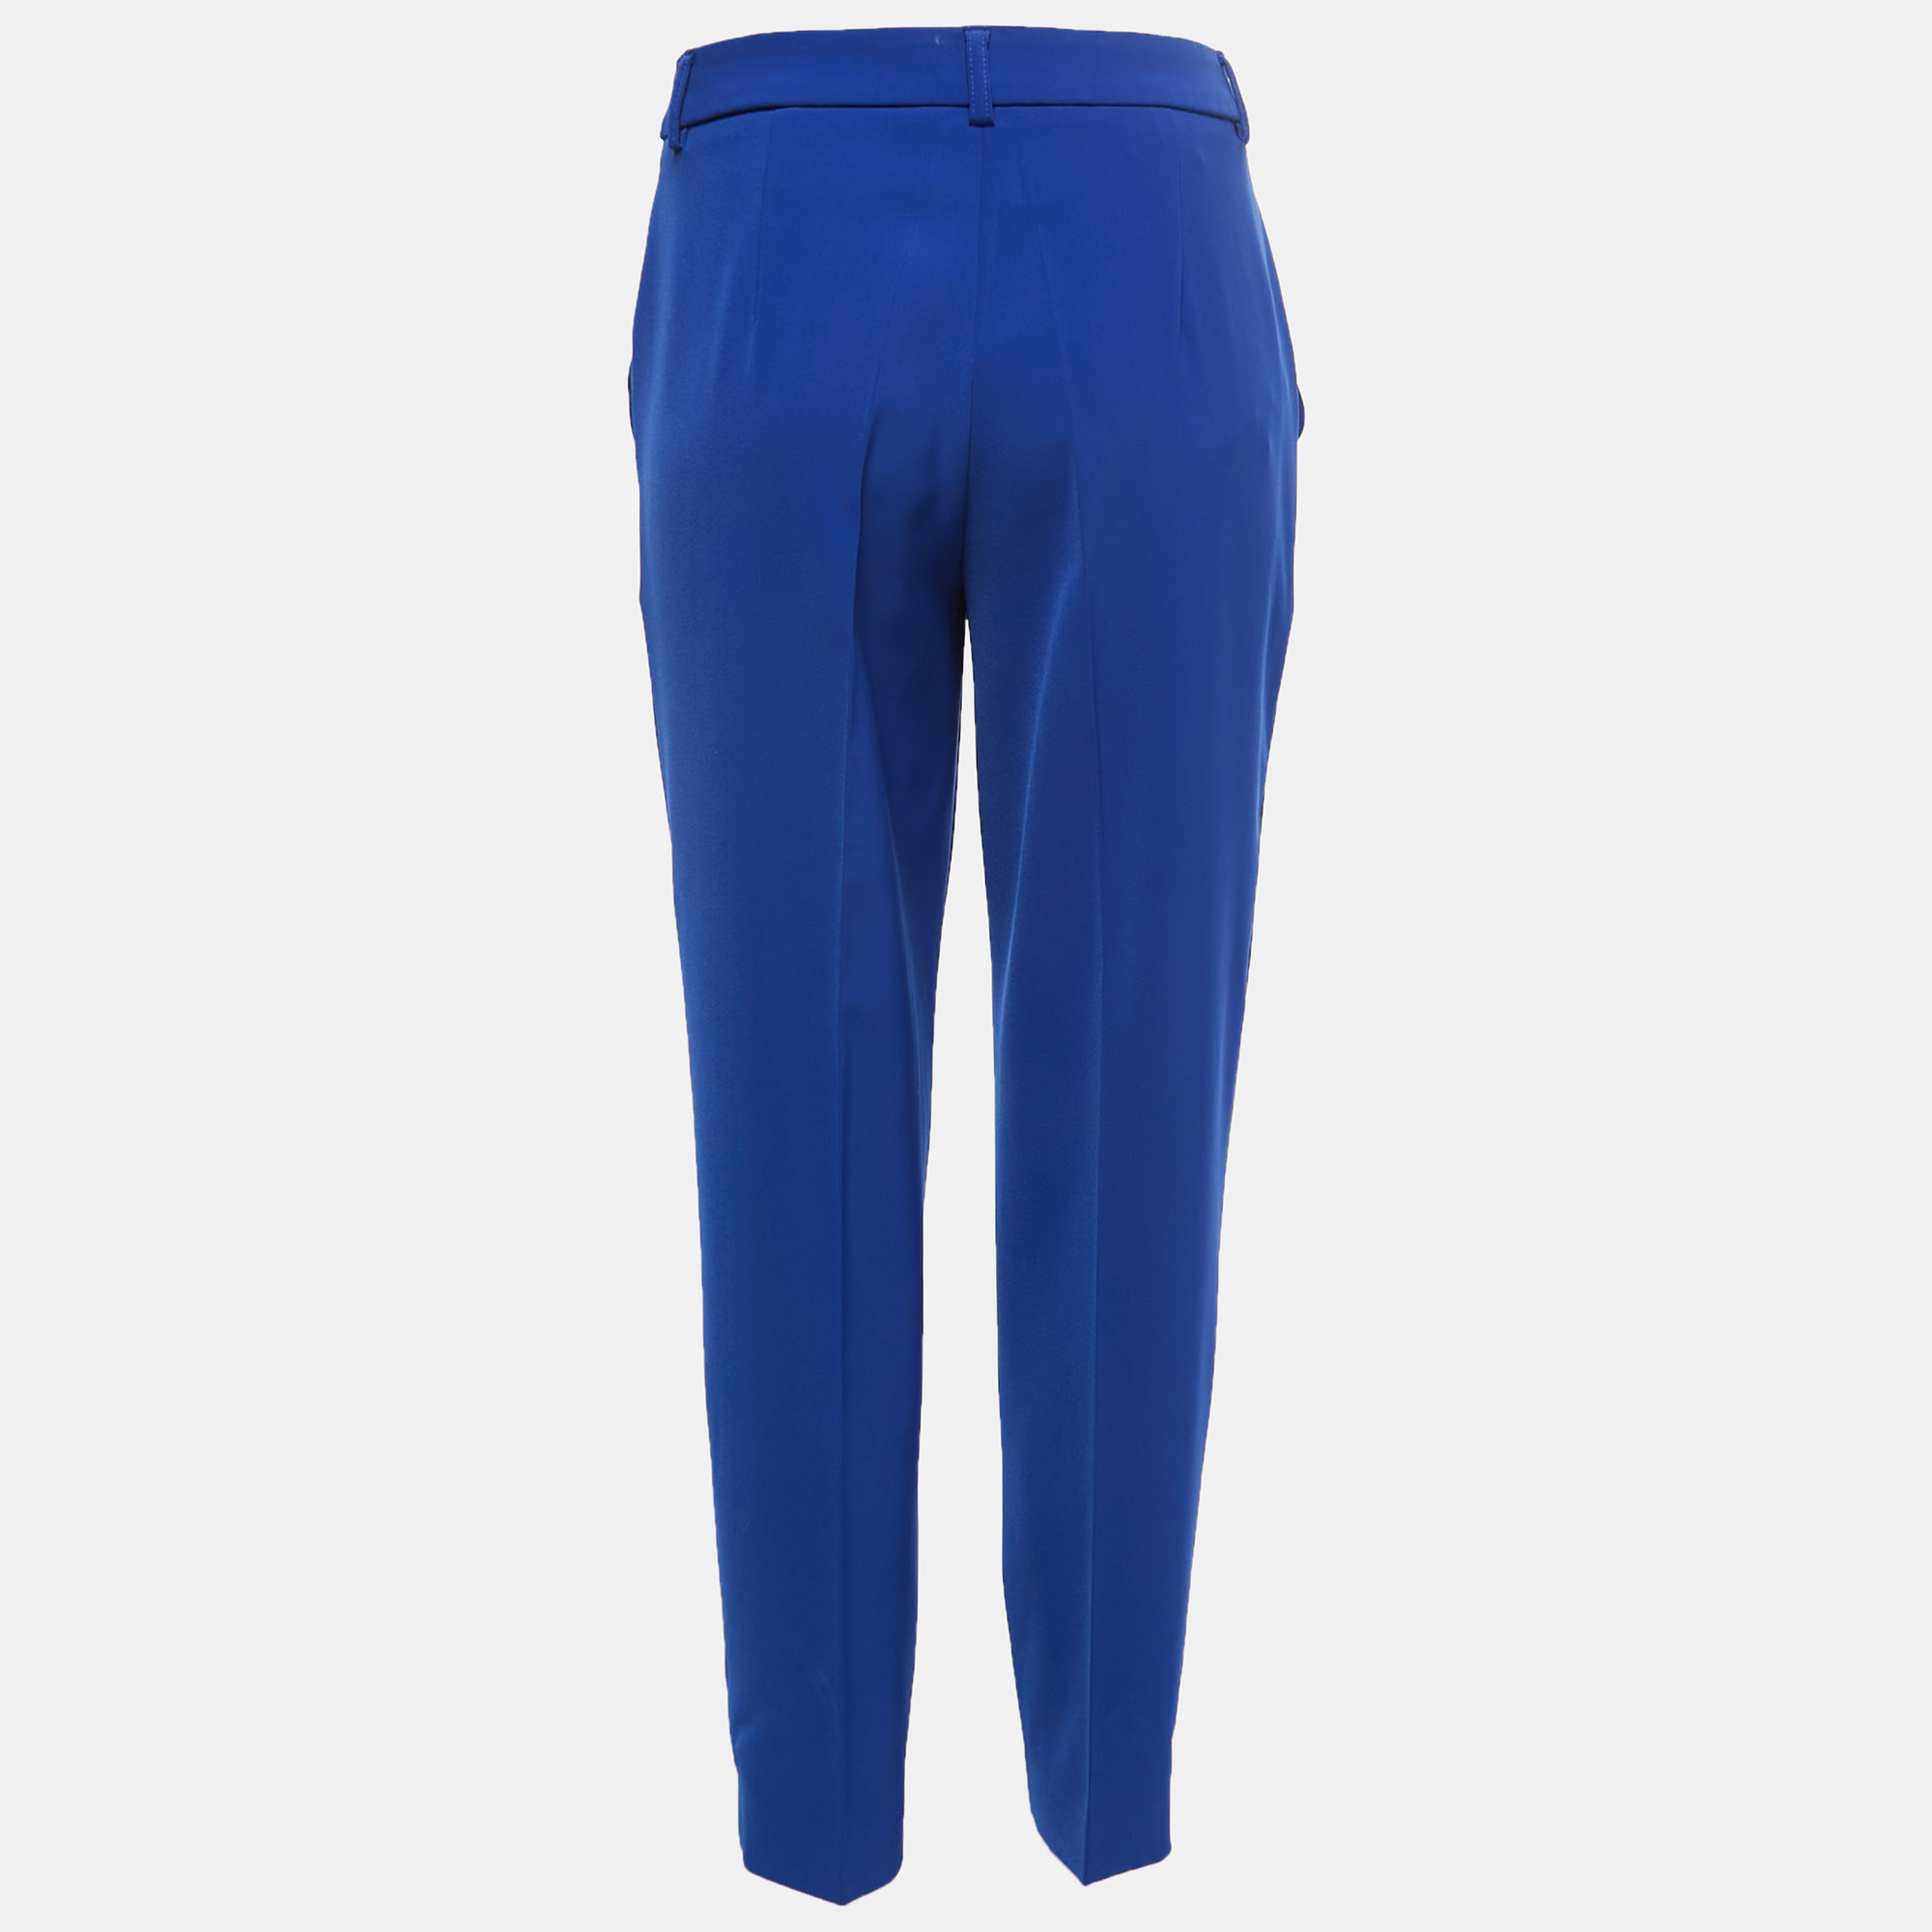 

Boutique Moschino Blue Crepe Pressed Crease Trousers